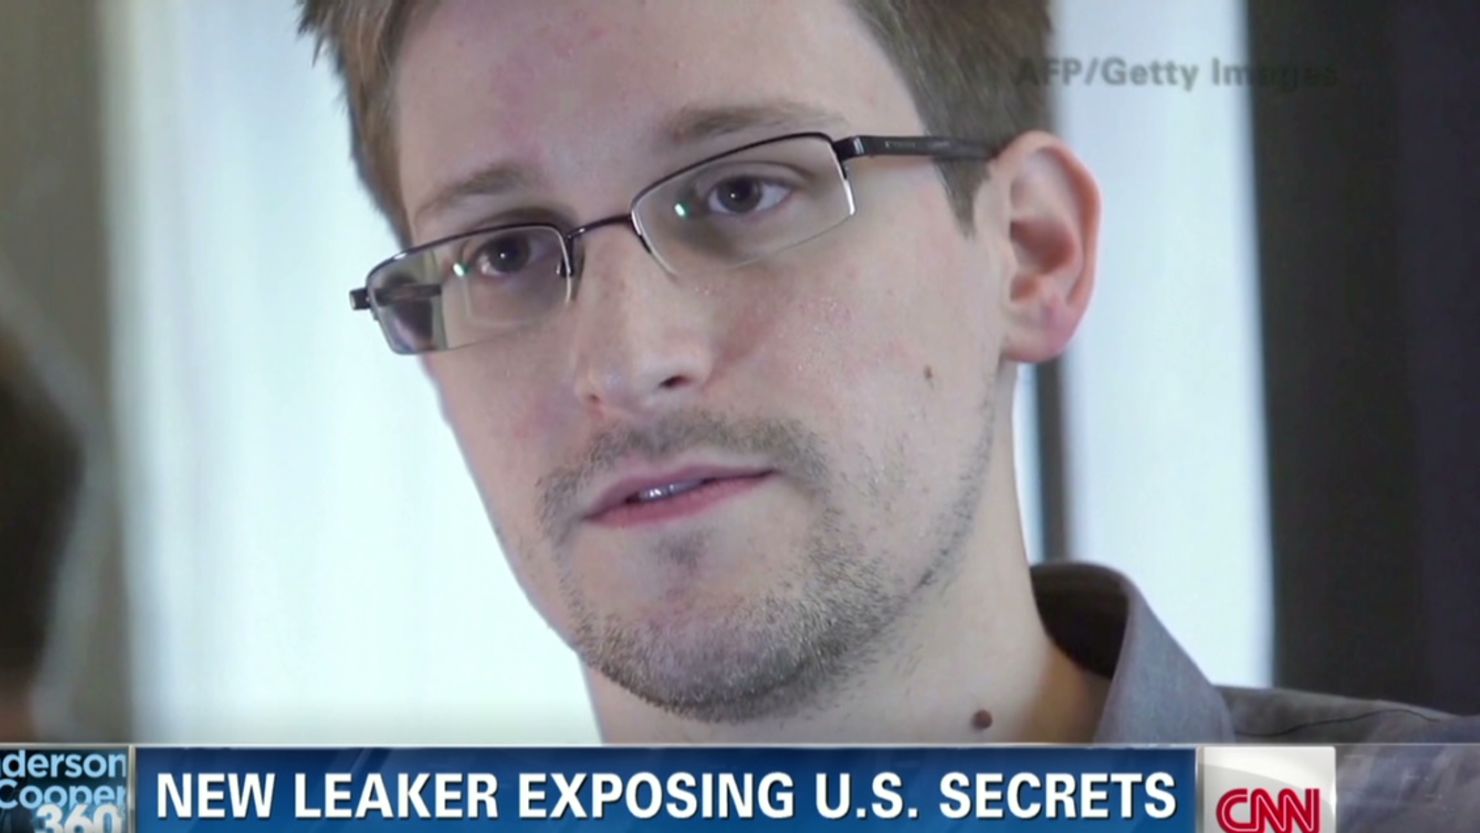 Edward Snowden gets three more years of residency in Russia.